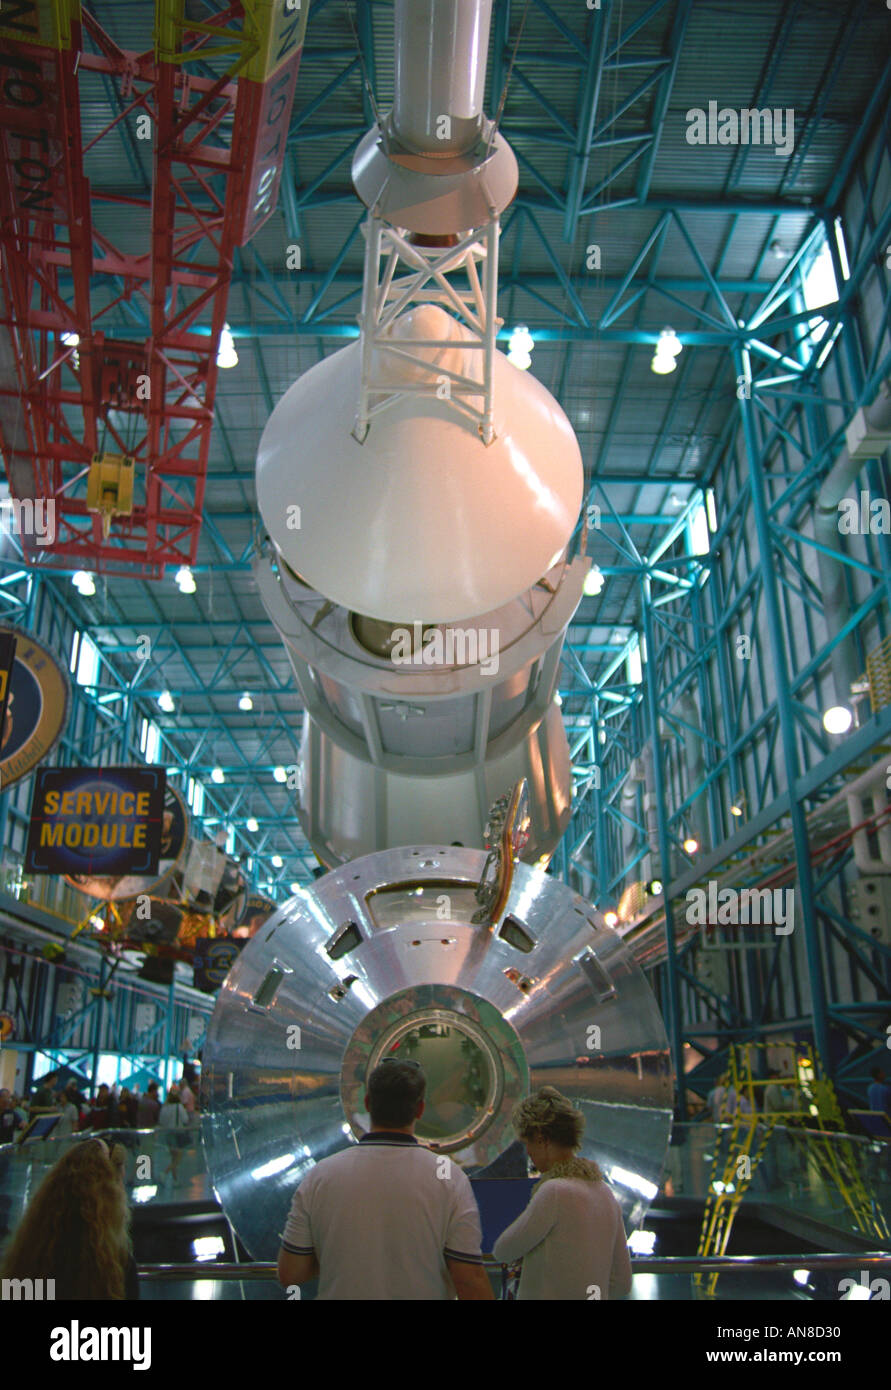 Saturn 5 rocket at Kennedy Space Center Stock Photo